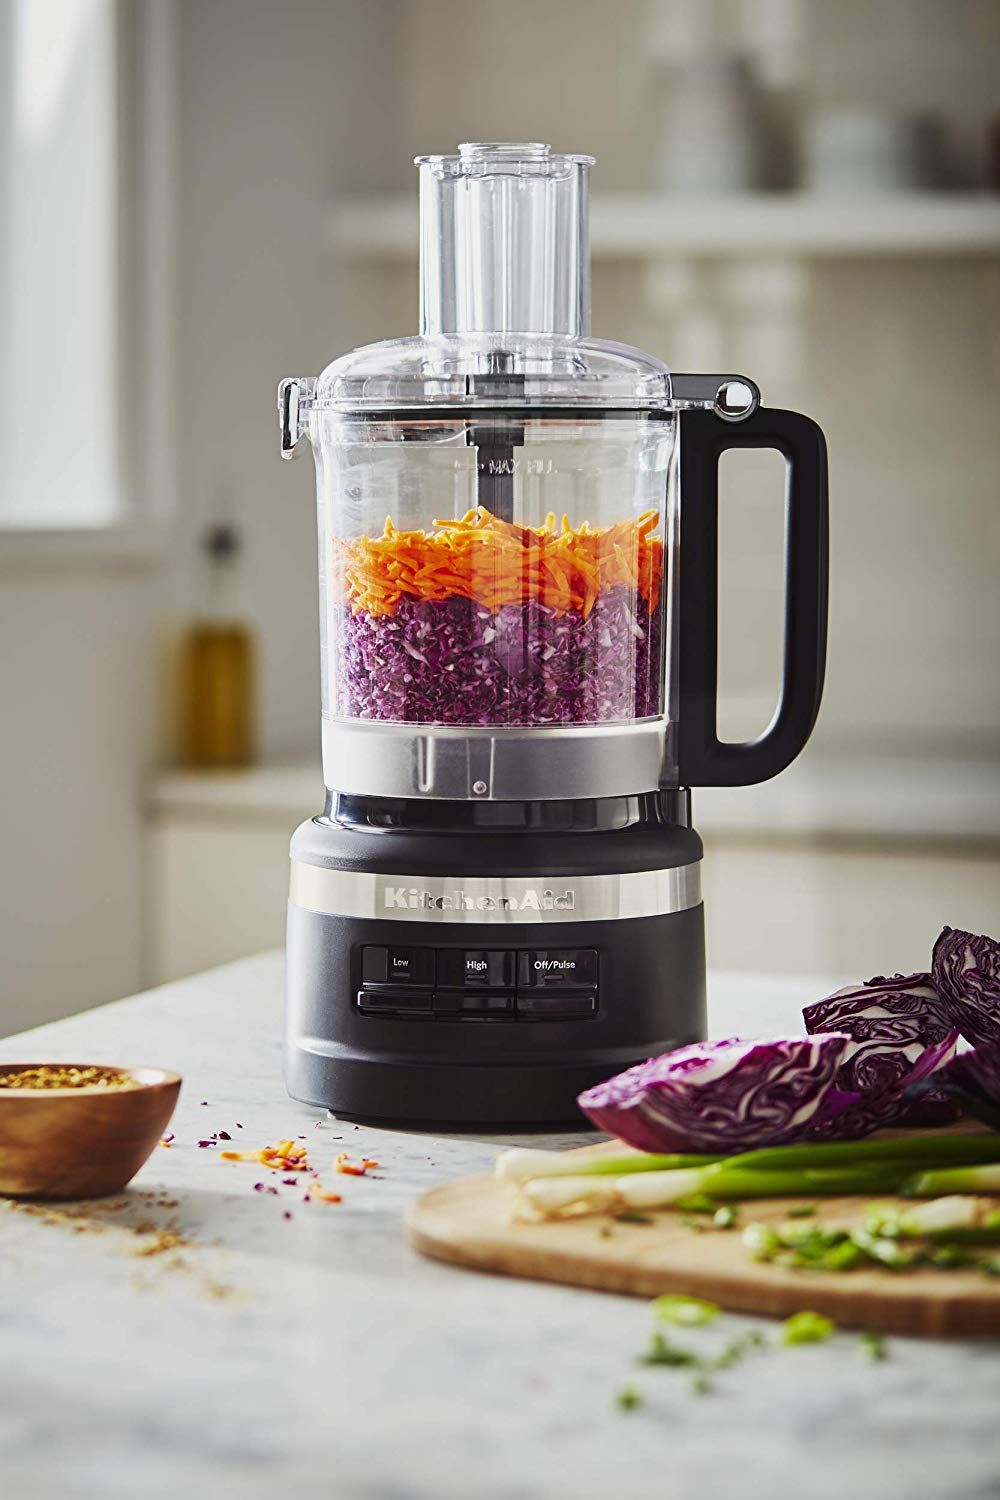 This KitchenAid Processor 43 Percent Off Today - Amazon's Deal of the Day November 12, 2018 - Delish.com